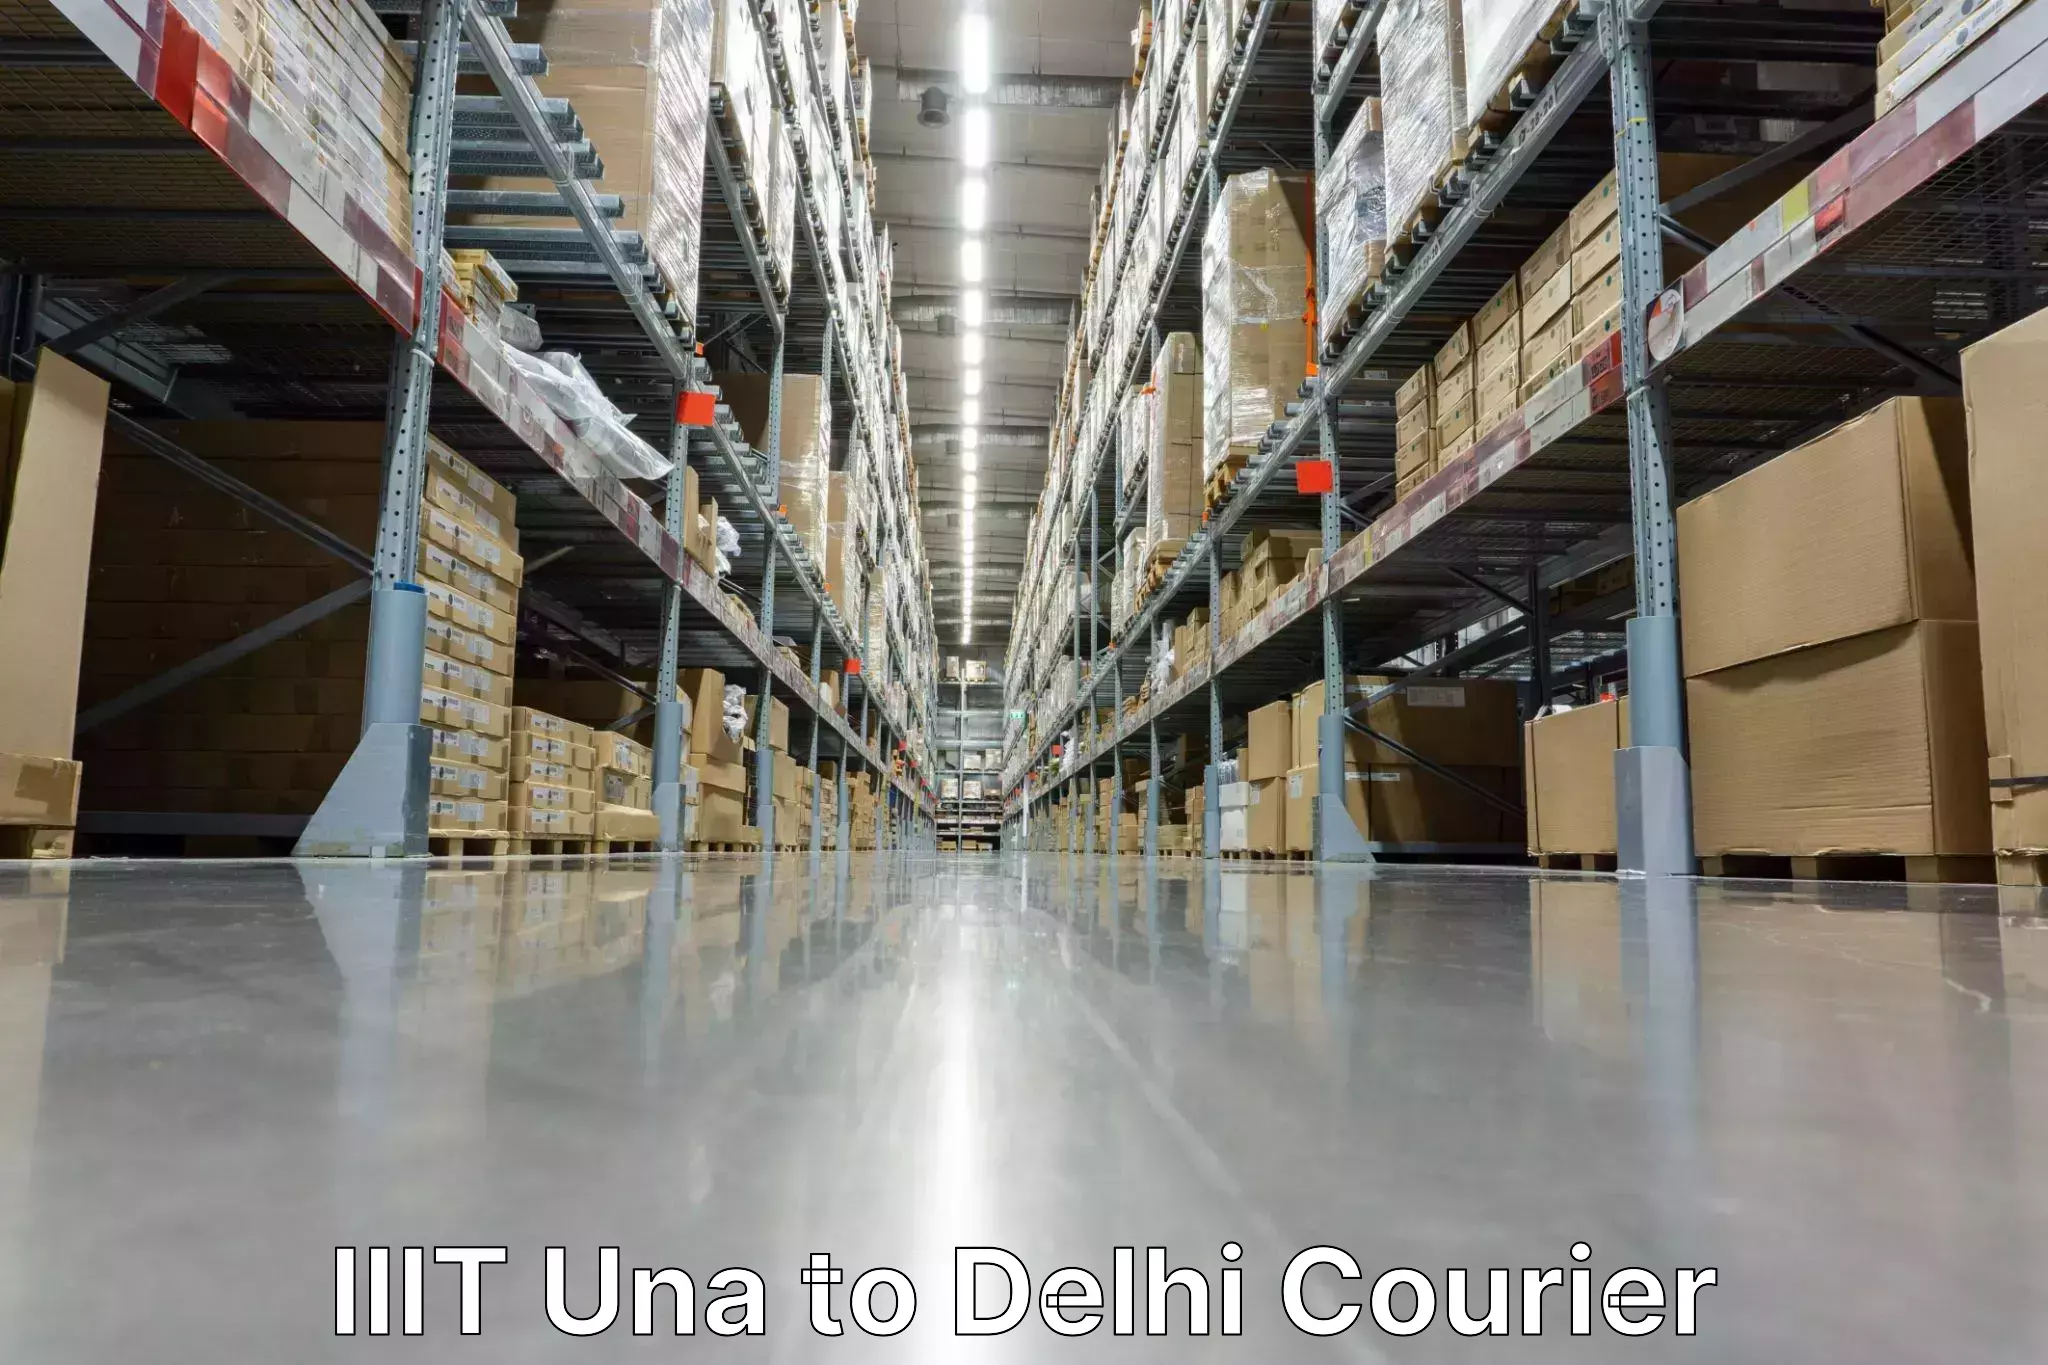 Customized delivery options in IIIT Una to University of Delhi